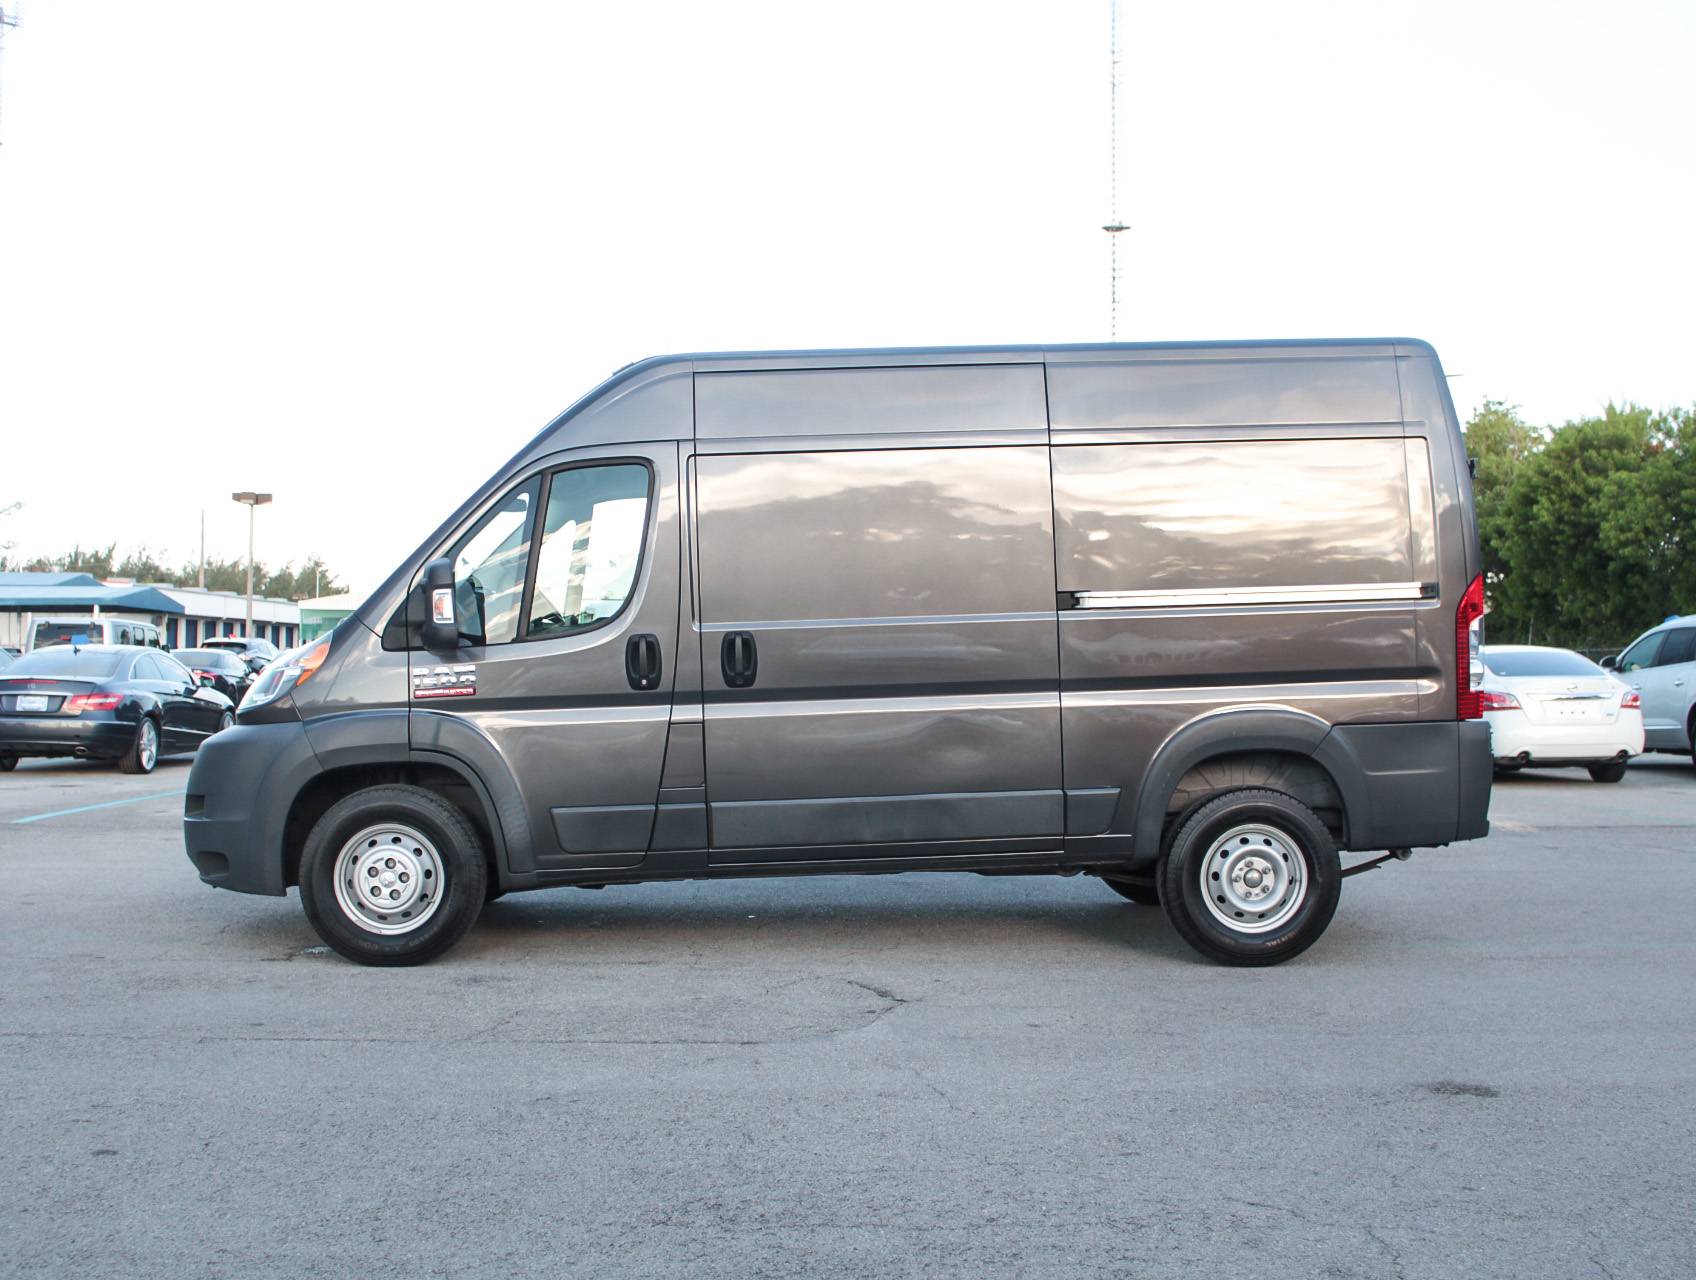 used promaster van for sale